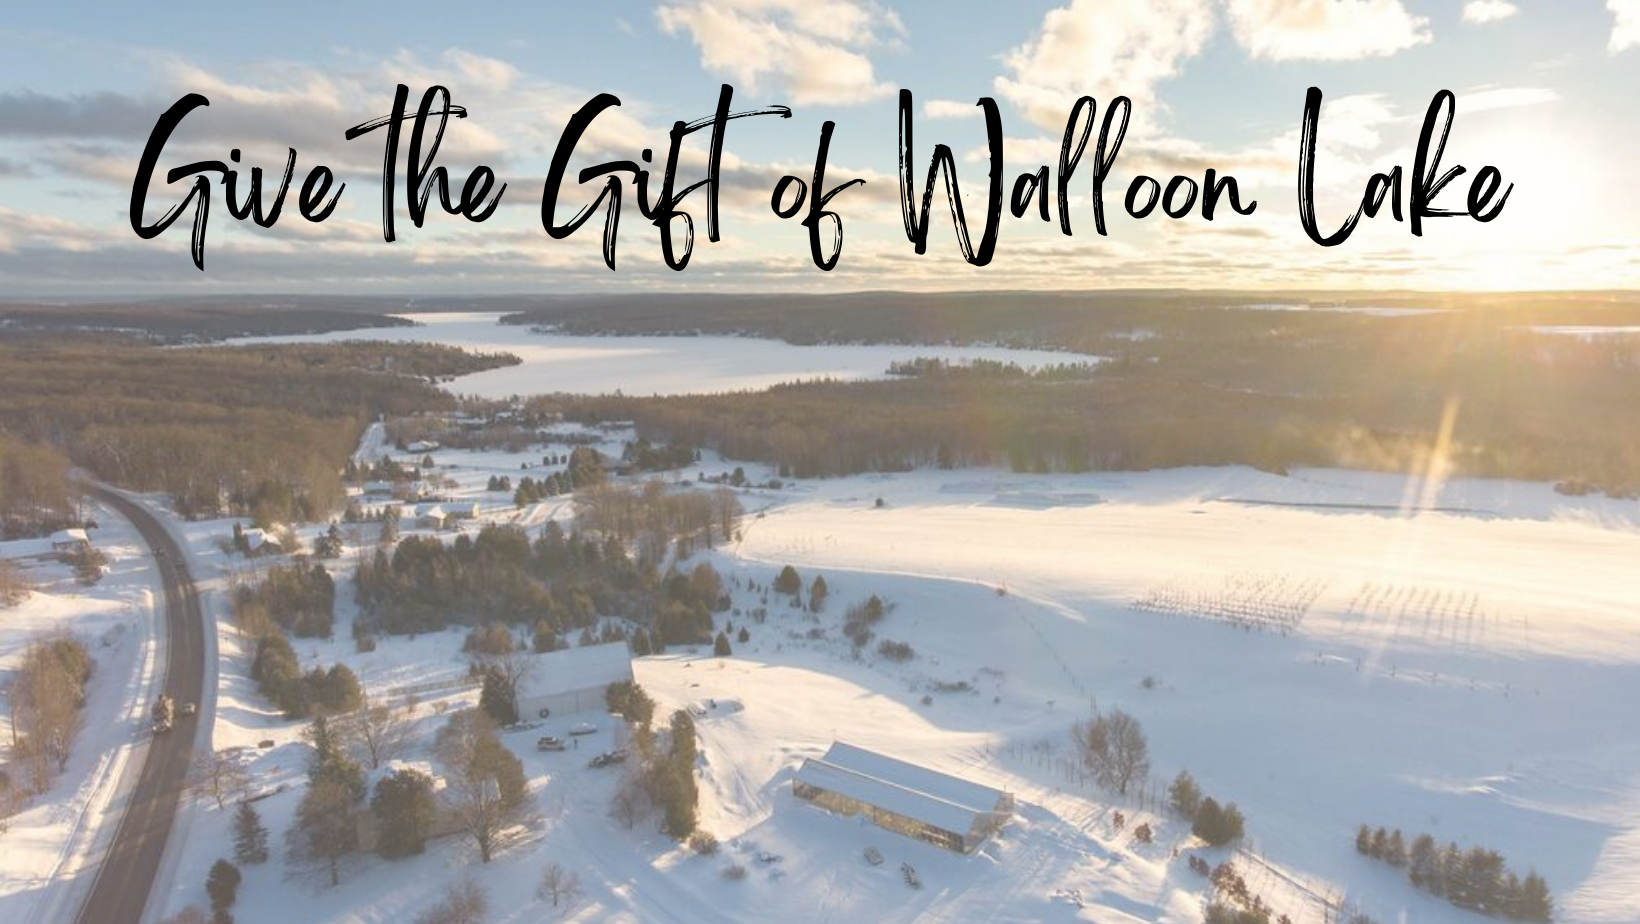 You are currently viewing Give the Gift of Walloon Lake this Holiday Season